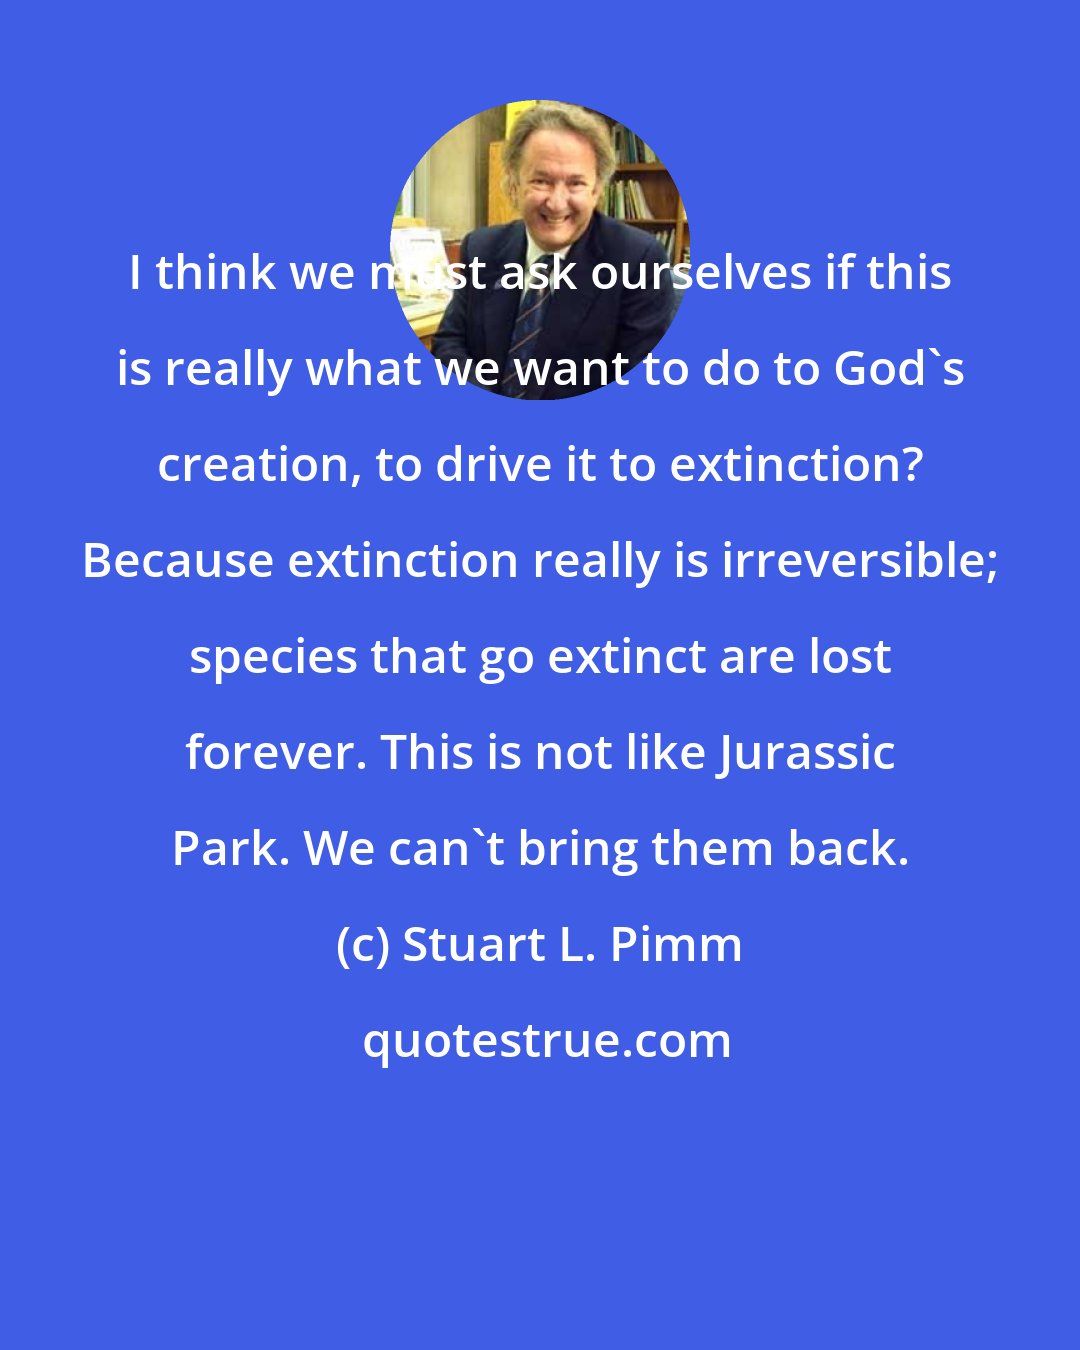 Stuart L. Pimm: I think we must ask ourselves if this is really what we want to do to God's creation, to drive it to extinction? Because extinction really is irreversible; species that go extinct are lost forever. This is not like Jurassic Park. We can't bring them back.